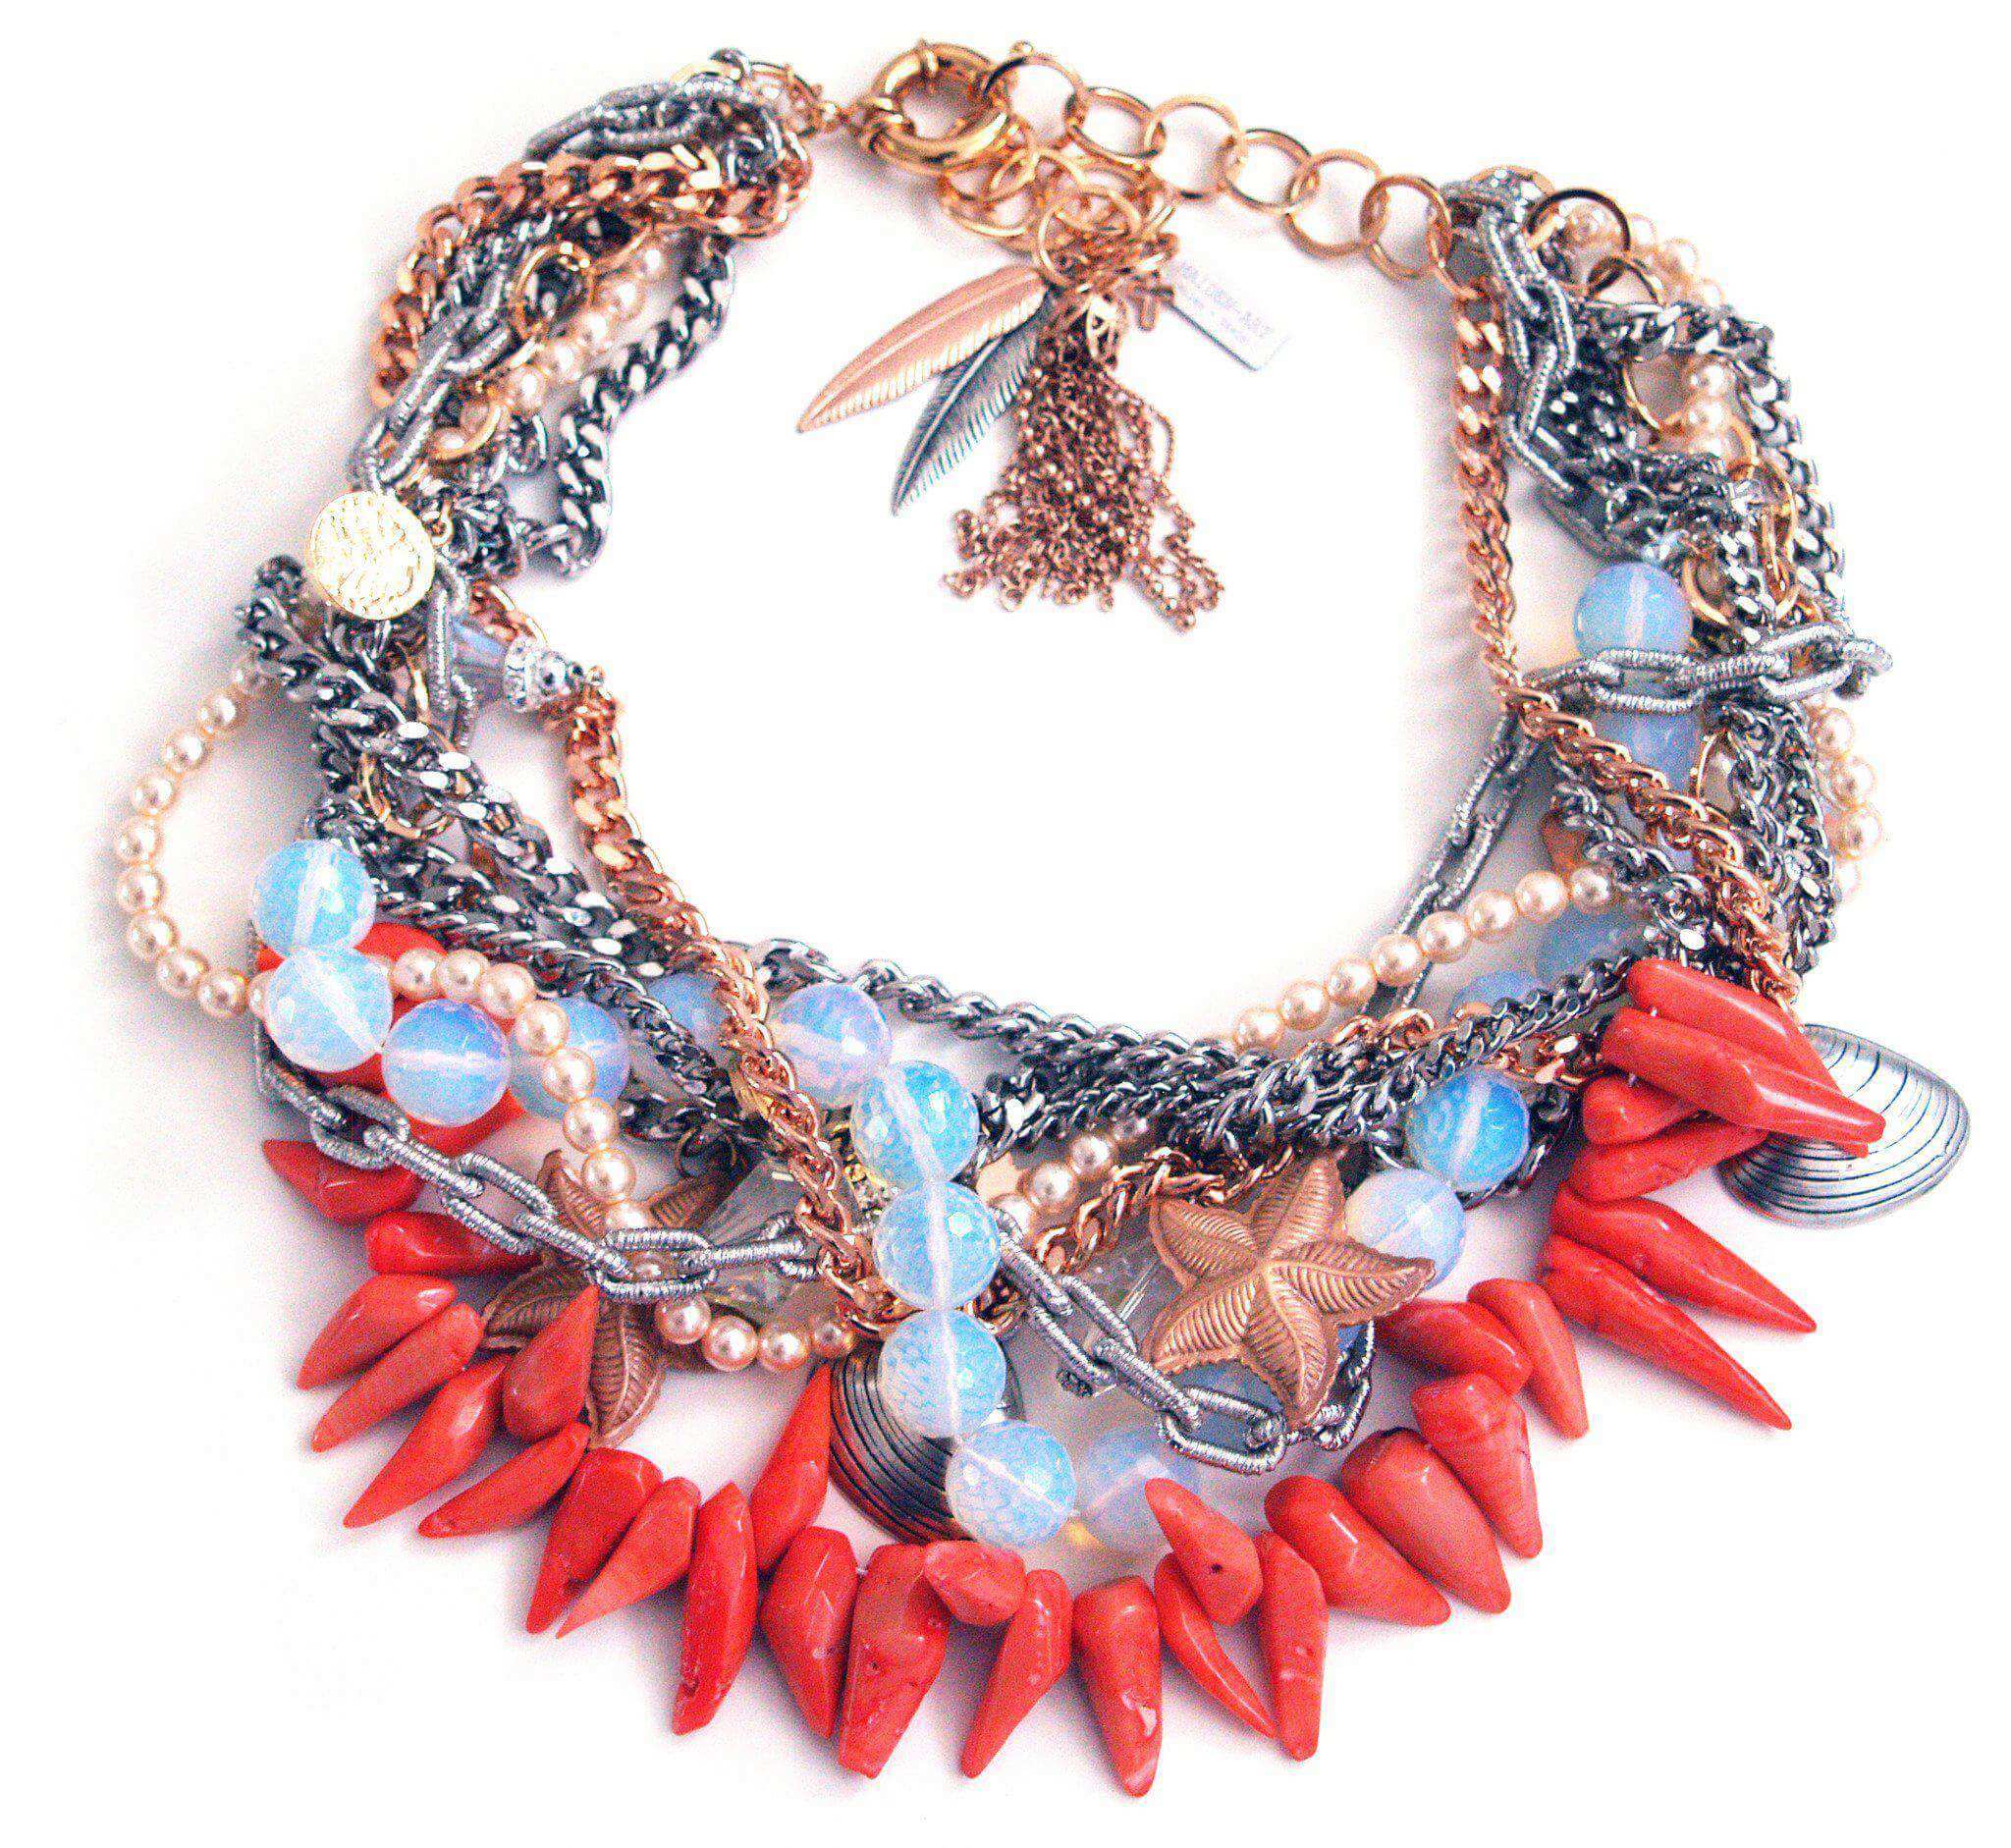 Coral and opalite stones bib necklace - Maiden-Art